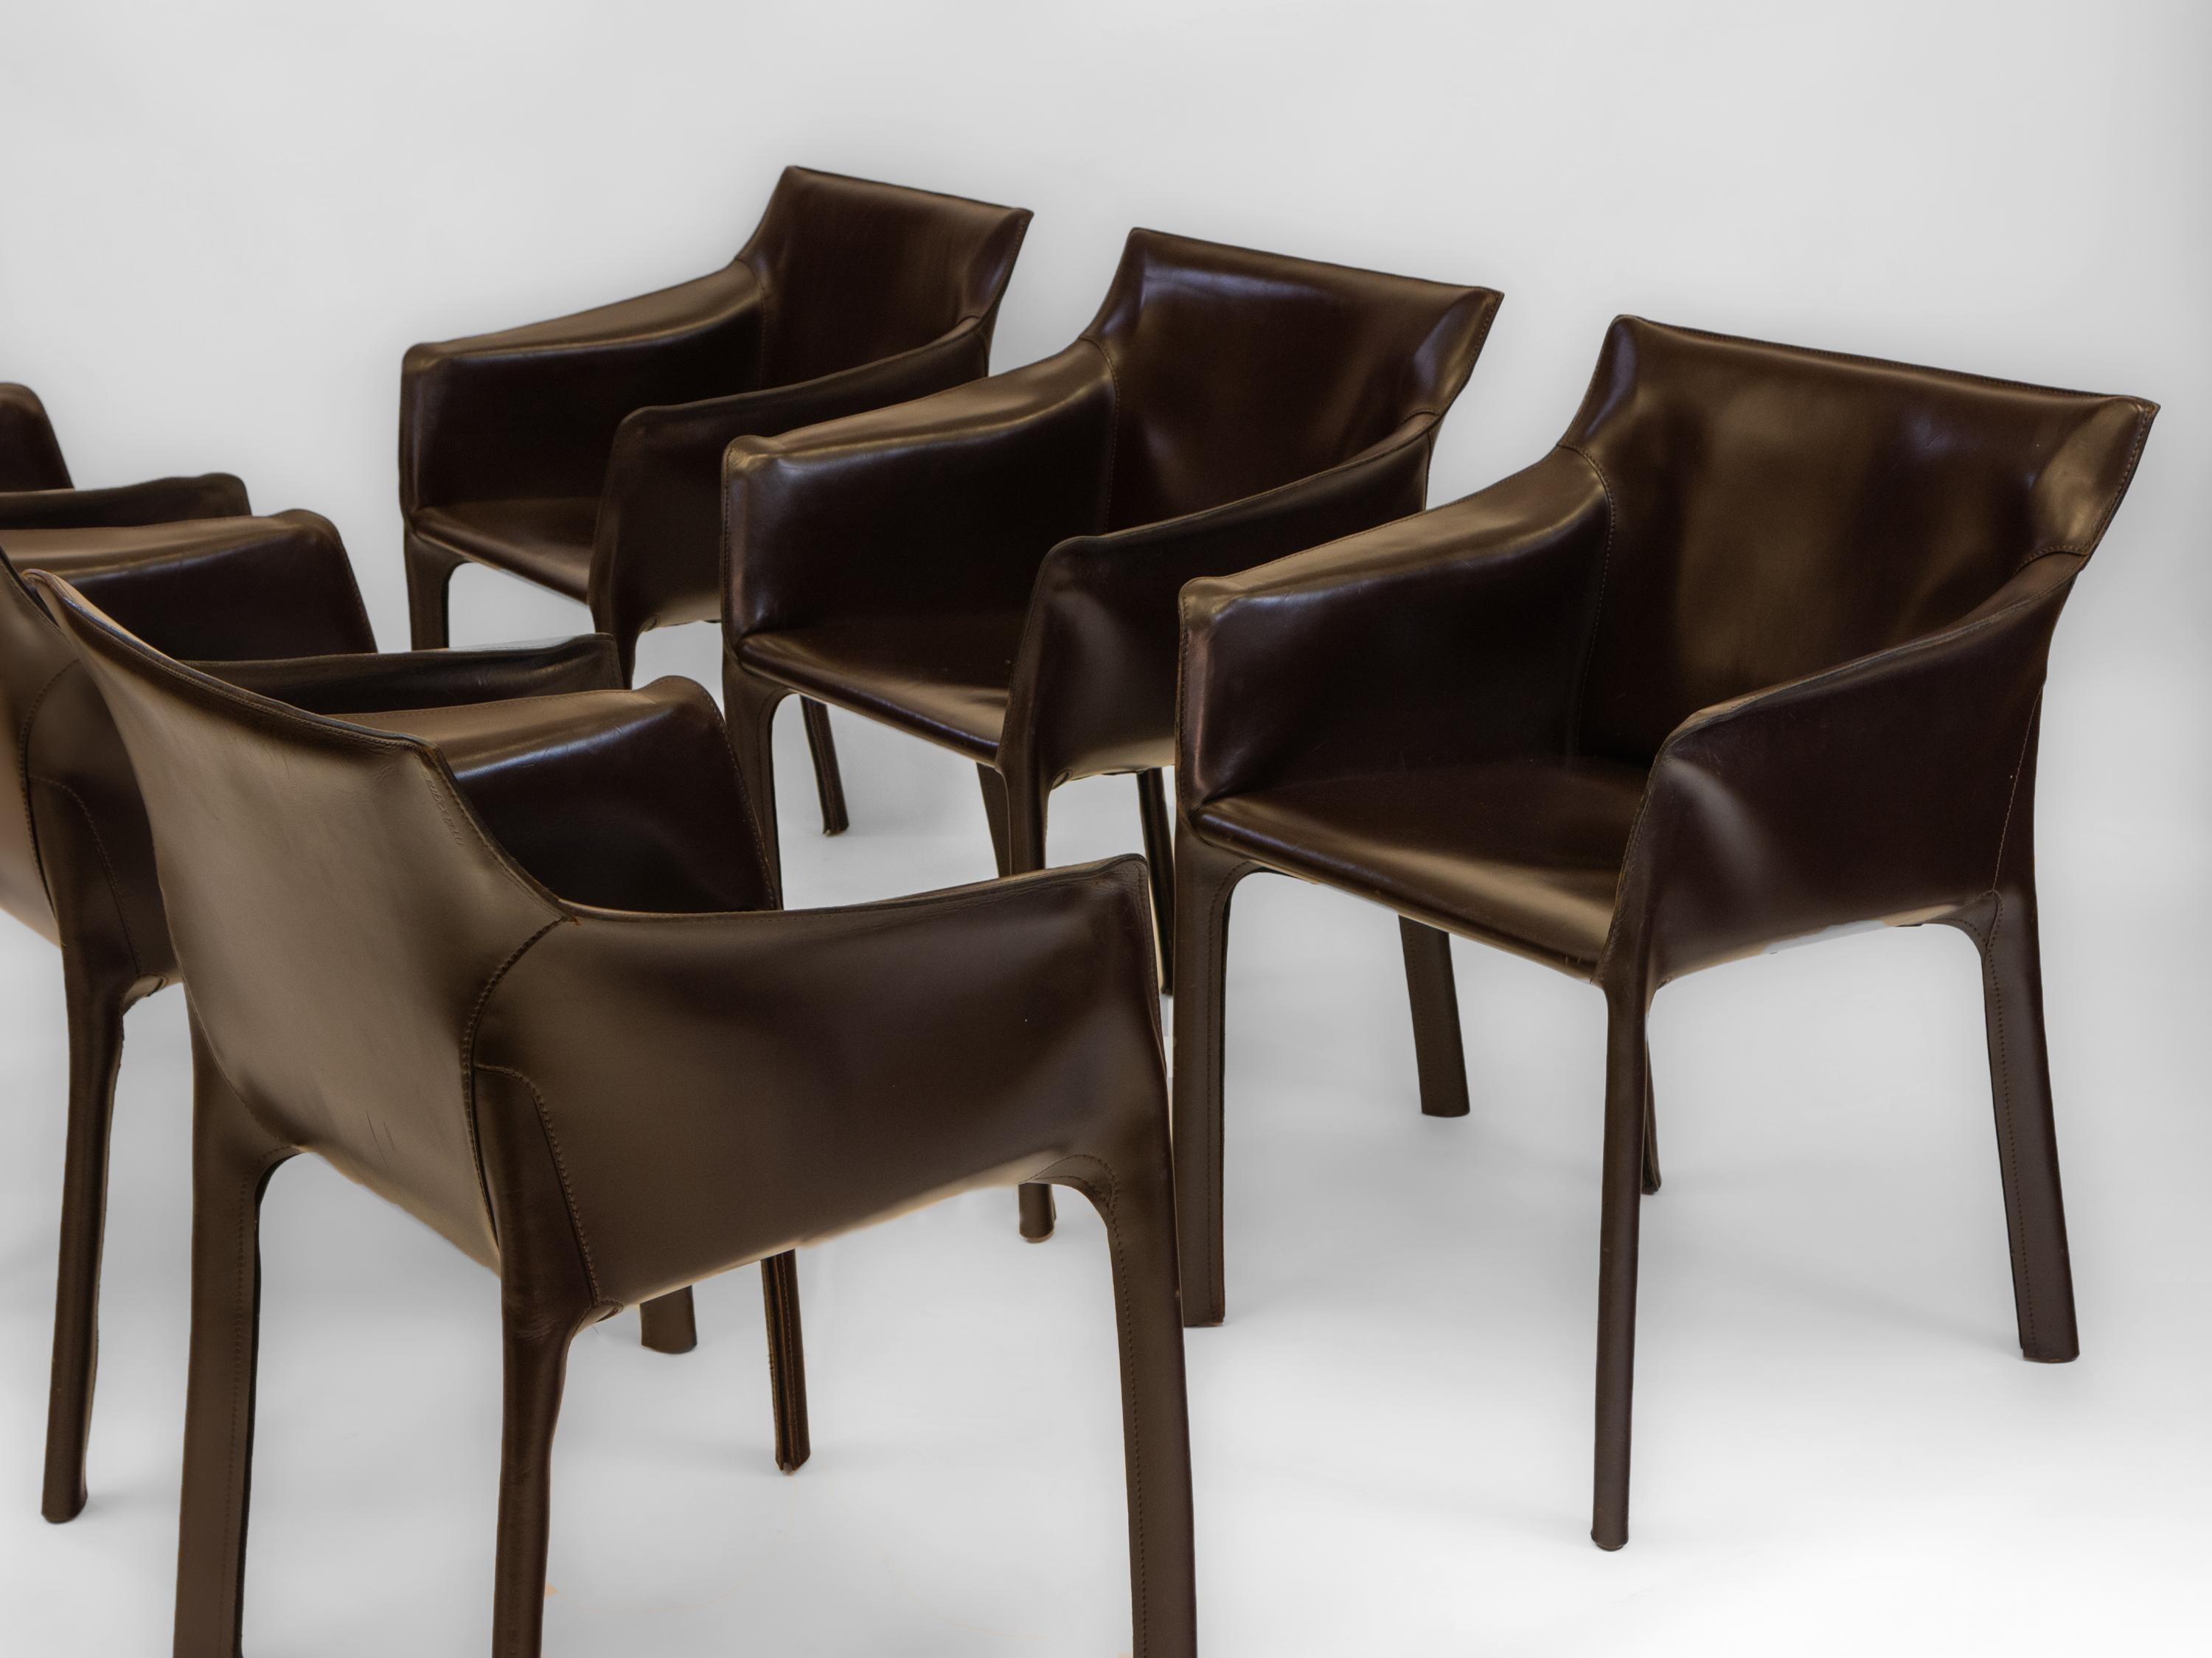 Vintage set of six Italian dark brown saddle leather cab 413 chairs by Matteo Grassi. Circa 1980's. Embossed stamped 'Matteograssi' to each chair. 

In the late 1970s, the name Matteo Grassi came to mean excellence worldwide for his distinctive and